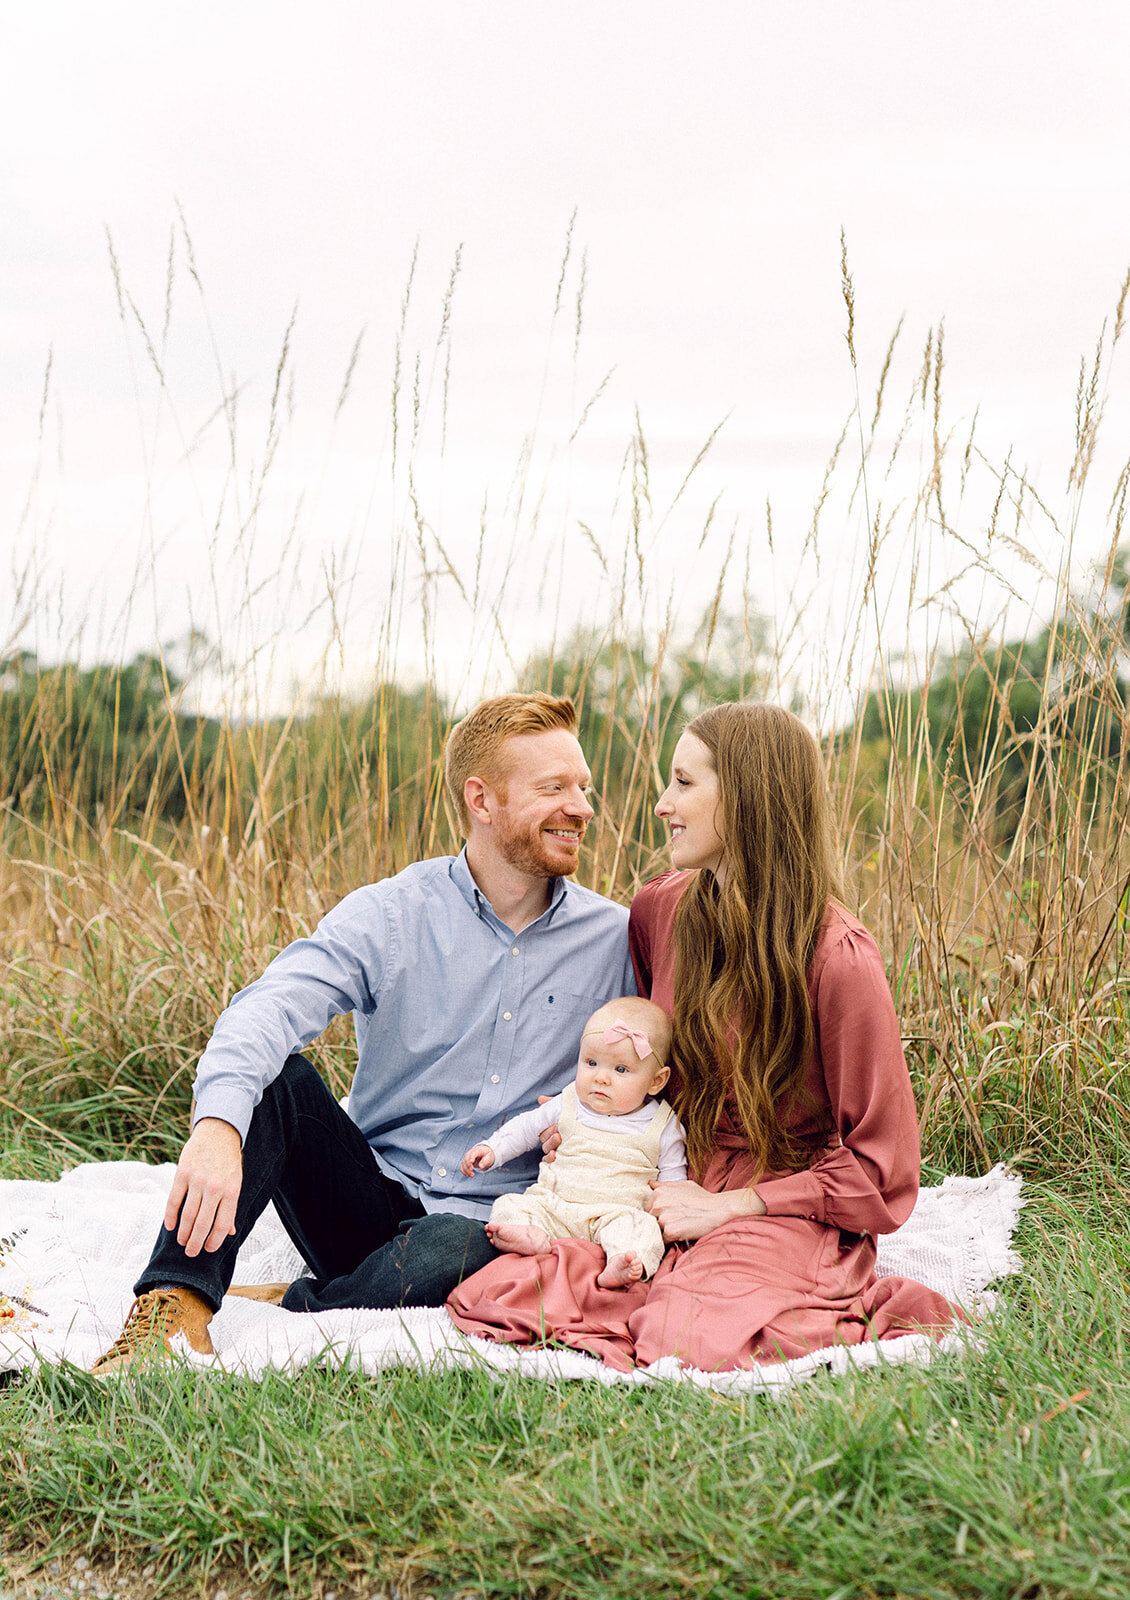 Couple and baby on picnic blanket